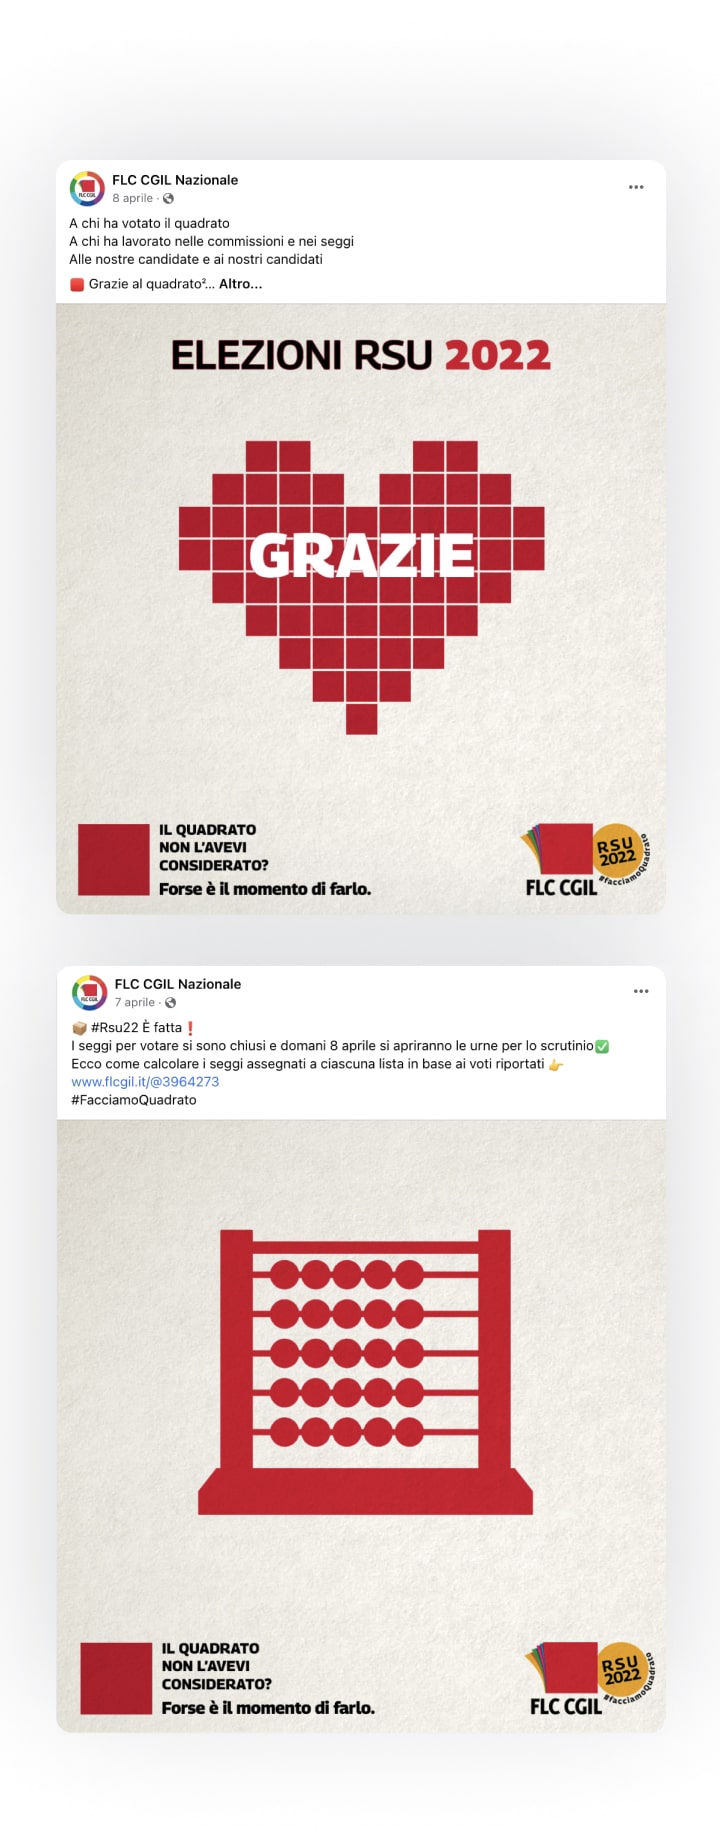 Two examples of card for the advertising for FLC CGIL for mobile